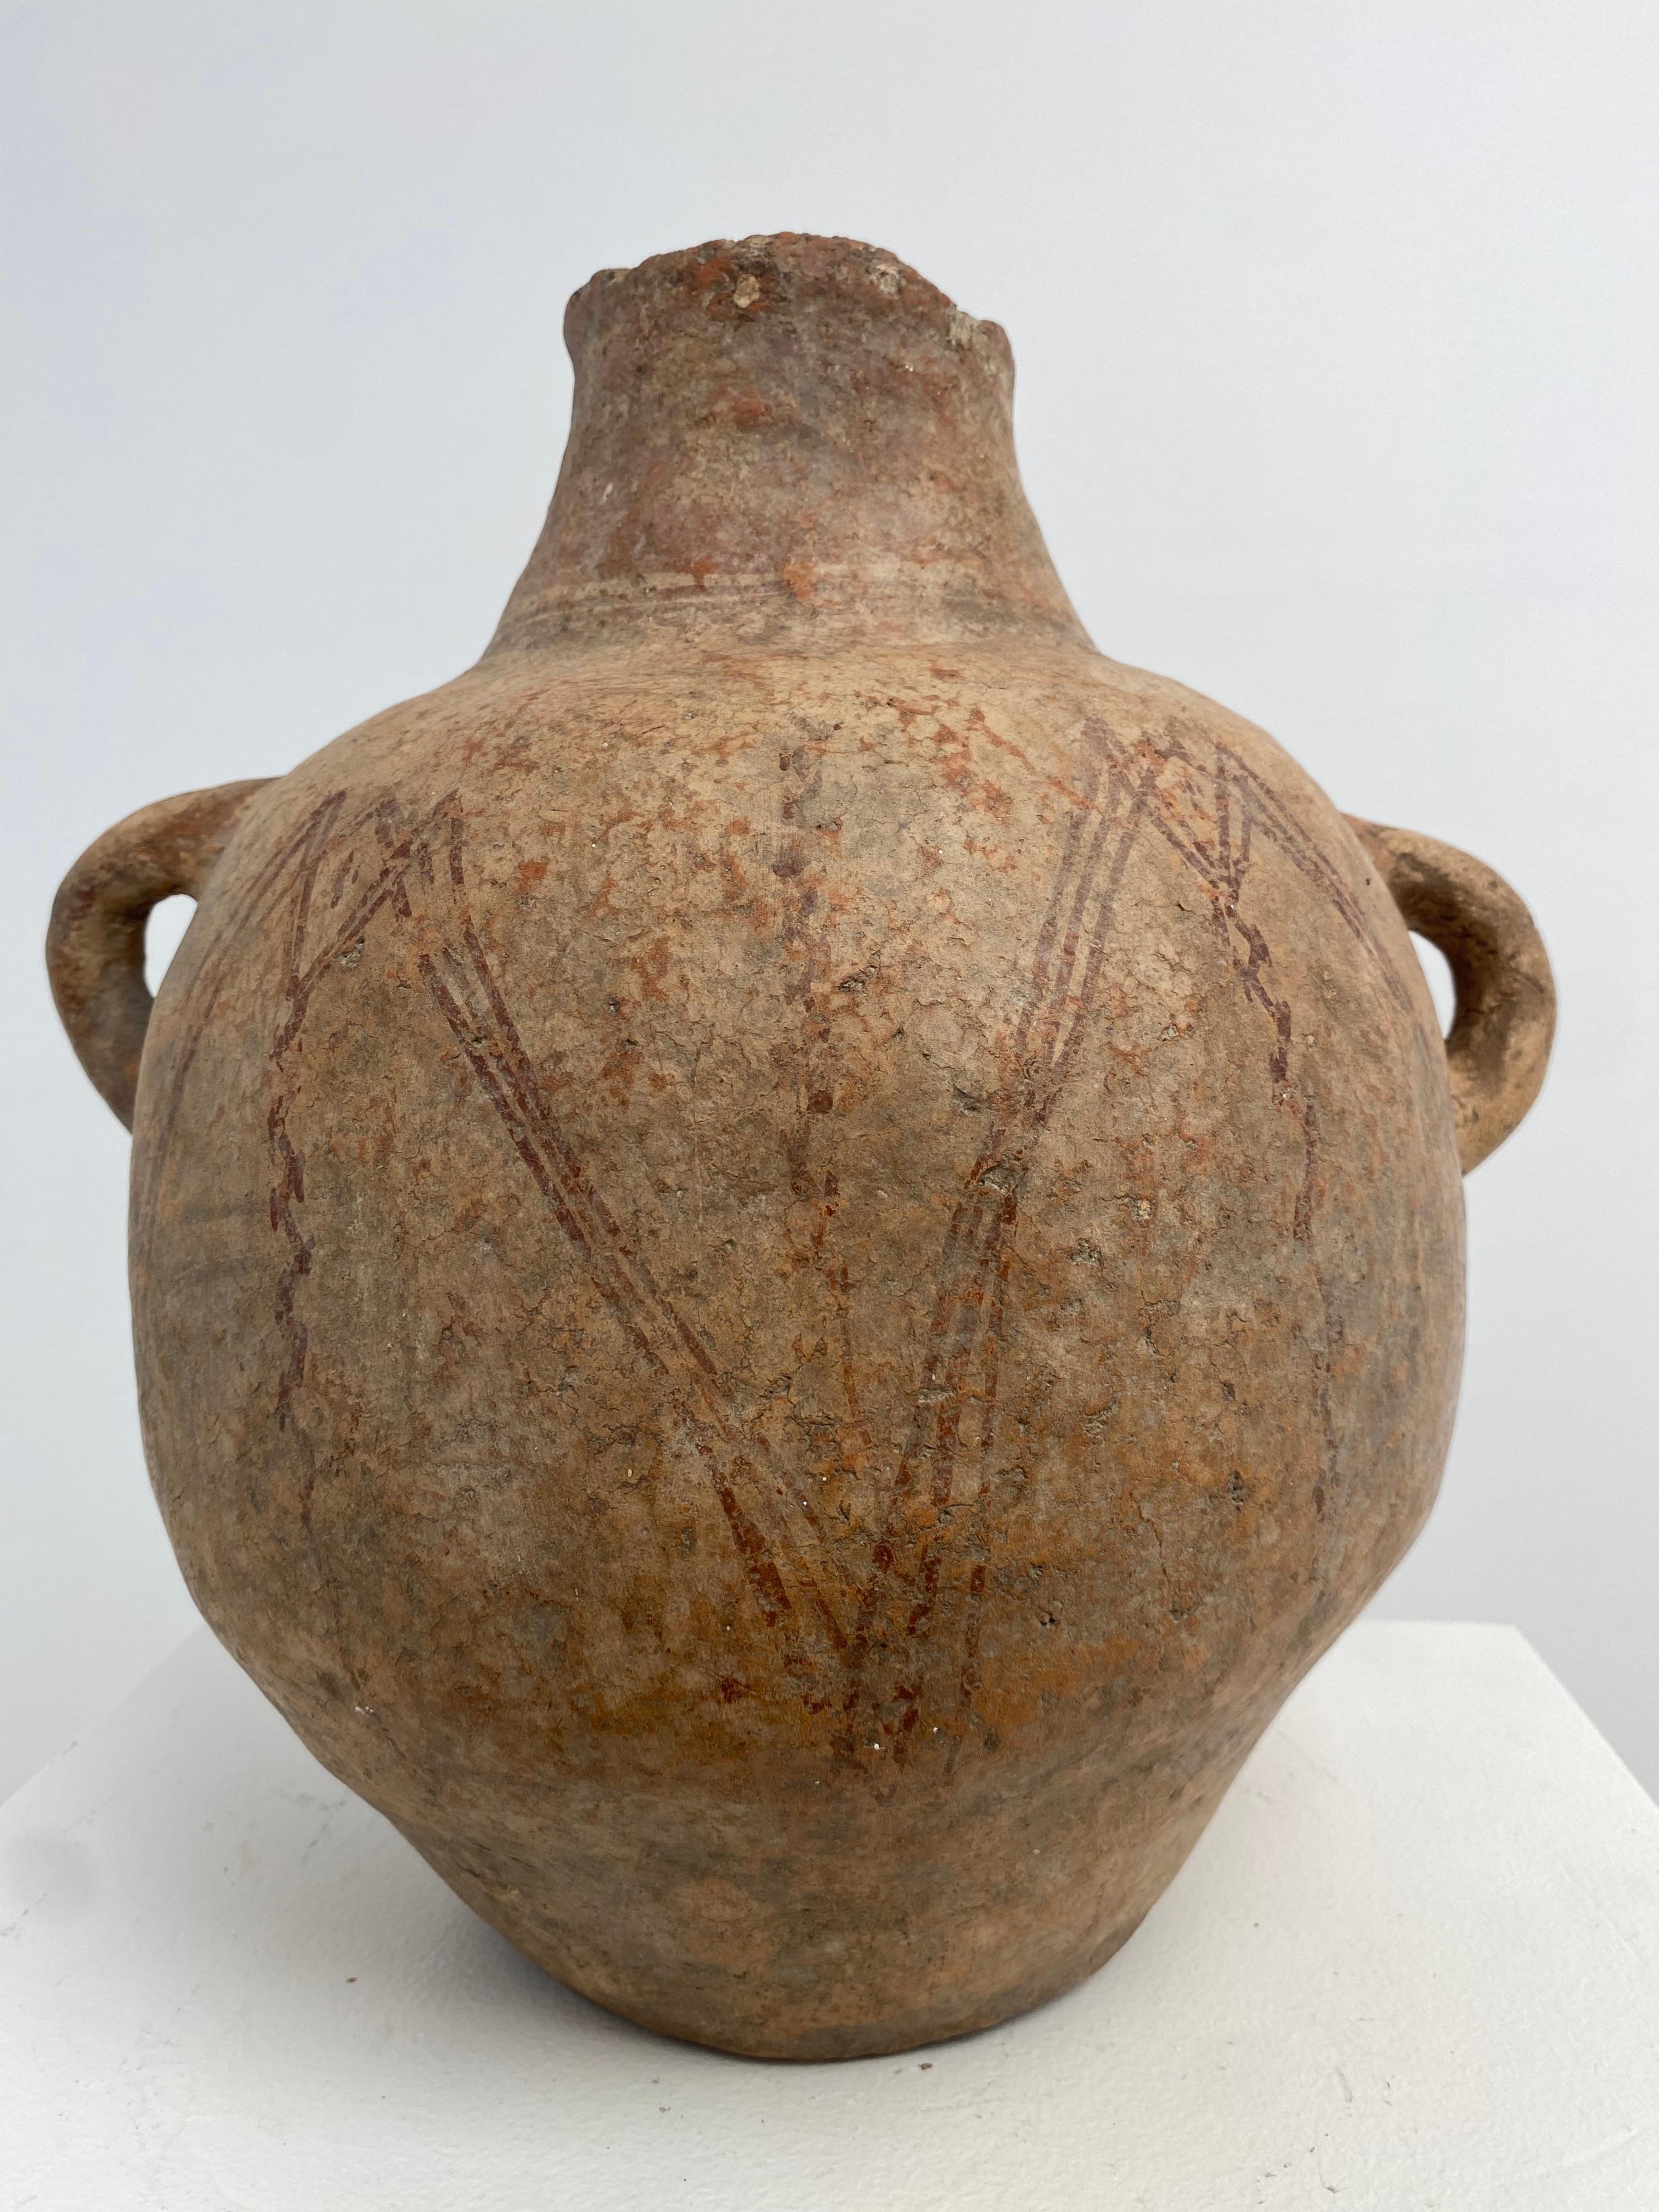 Elegant,antique,brutalist Terracotta Vase with 2 handles from Morocco,
beautiful old patina and shine of the terracotta,
faded Brown/Red  lines used as decoration,
very decorative object